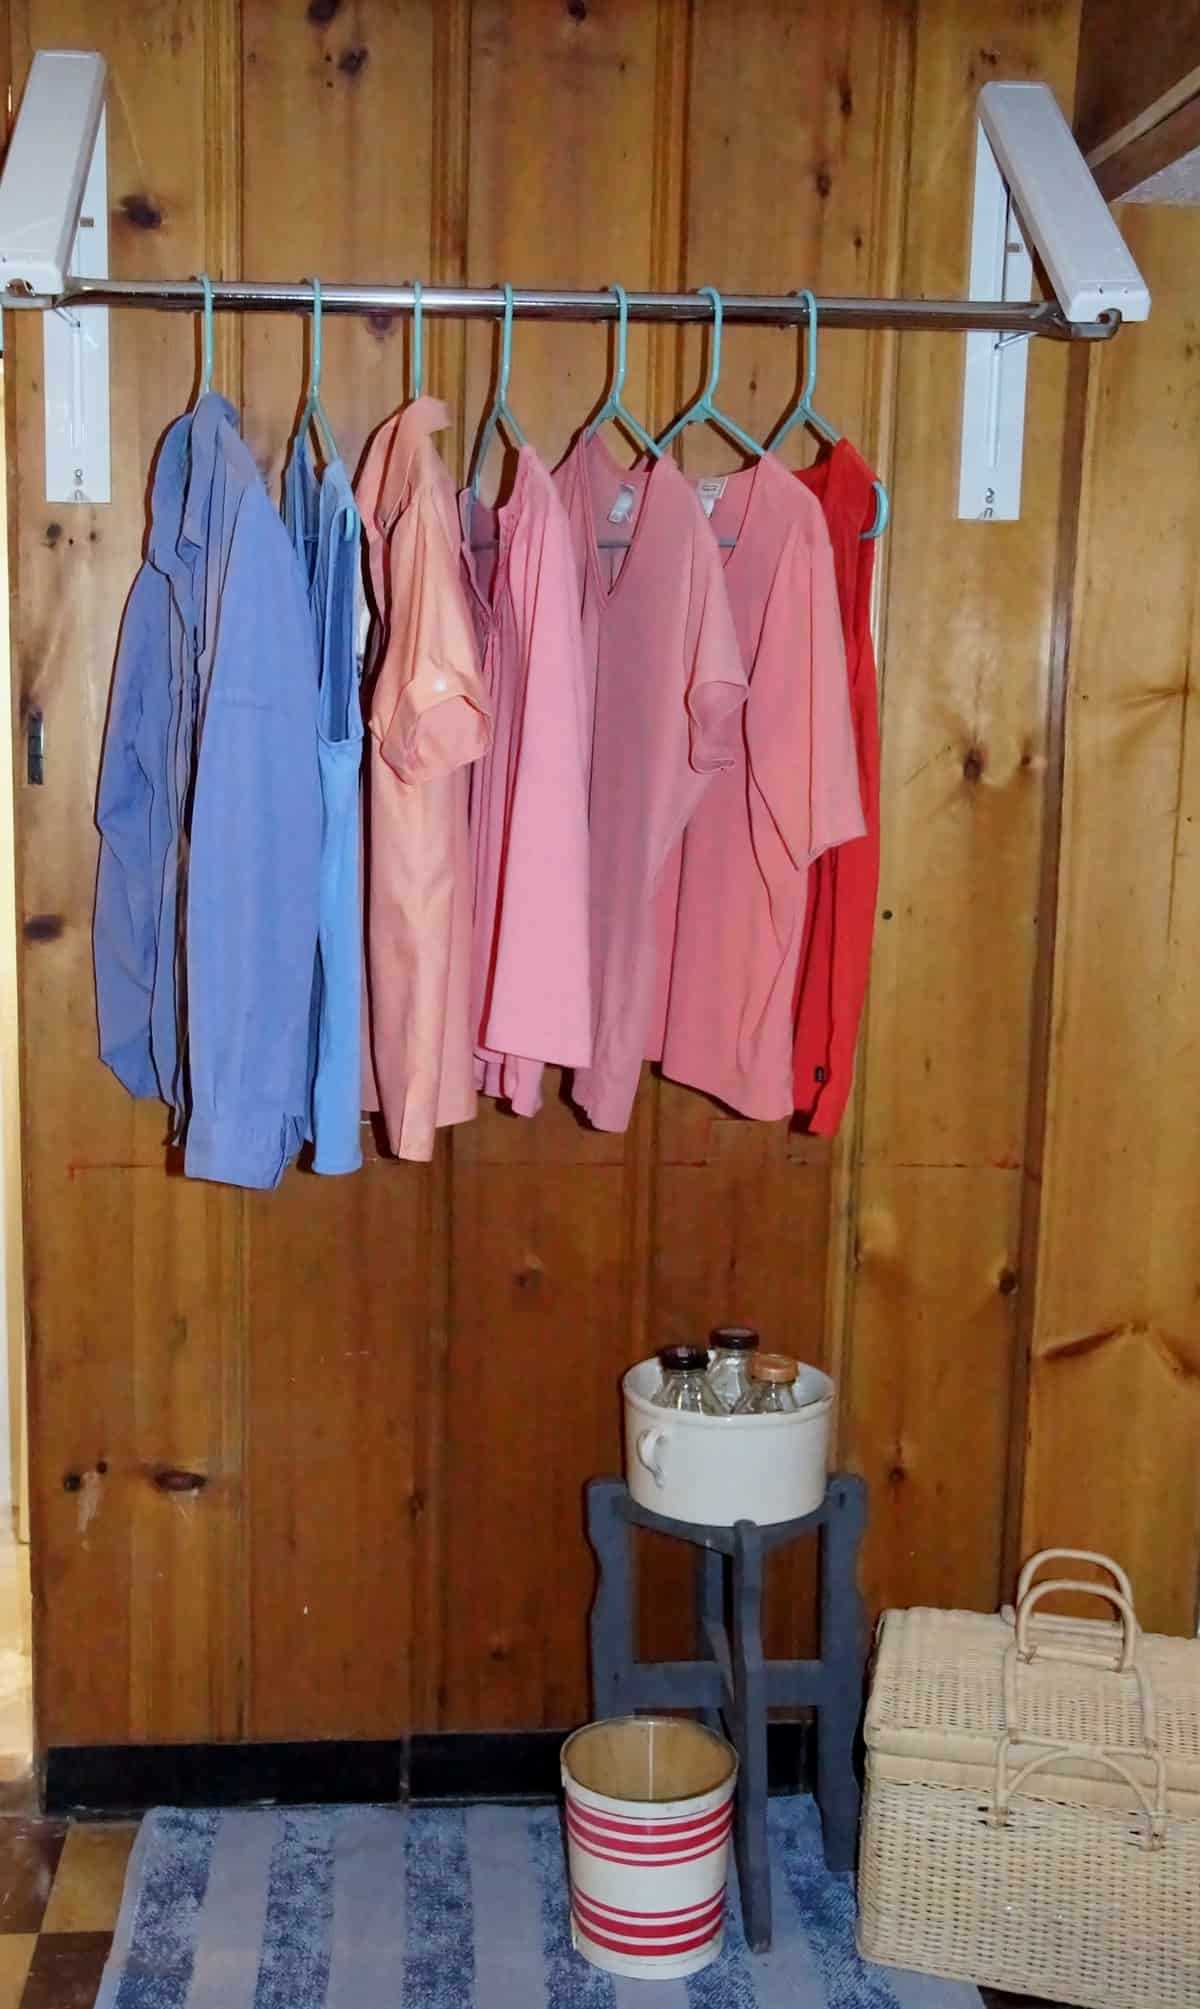 Using a Clothes Dryer